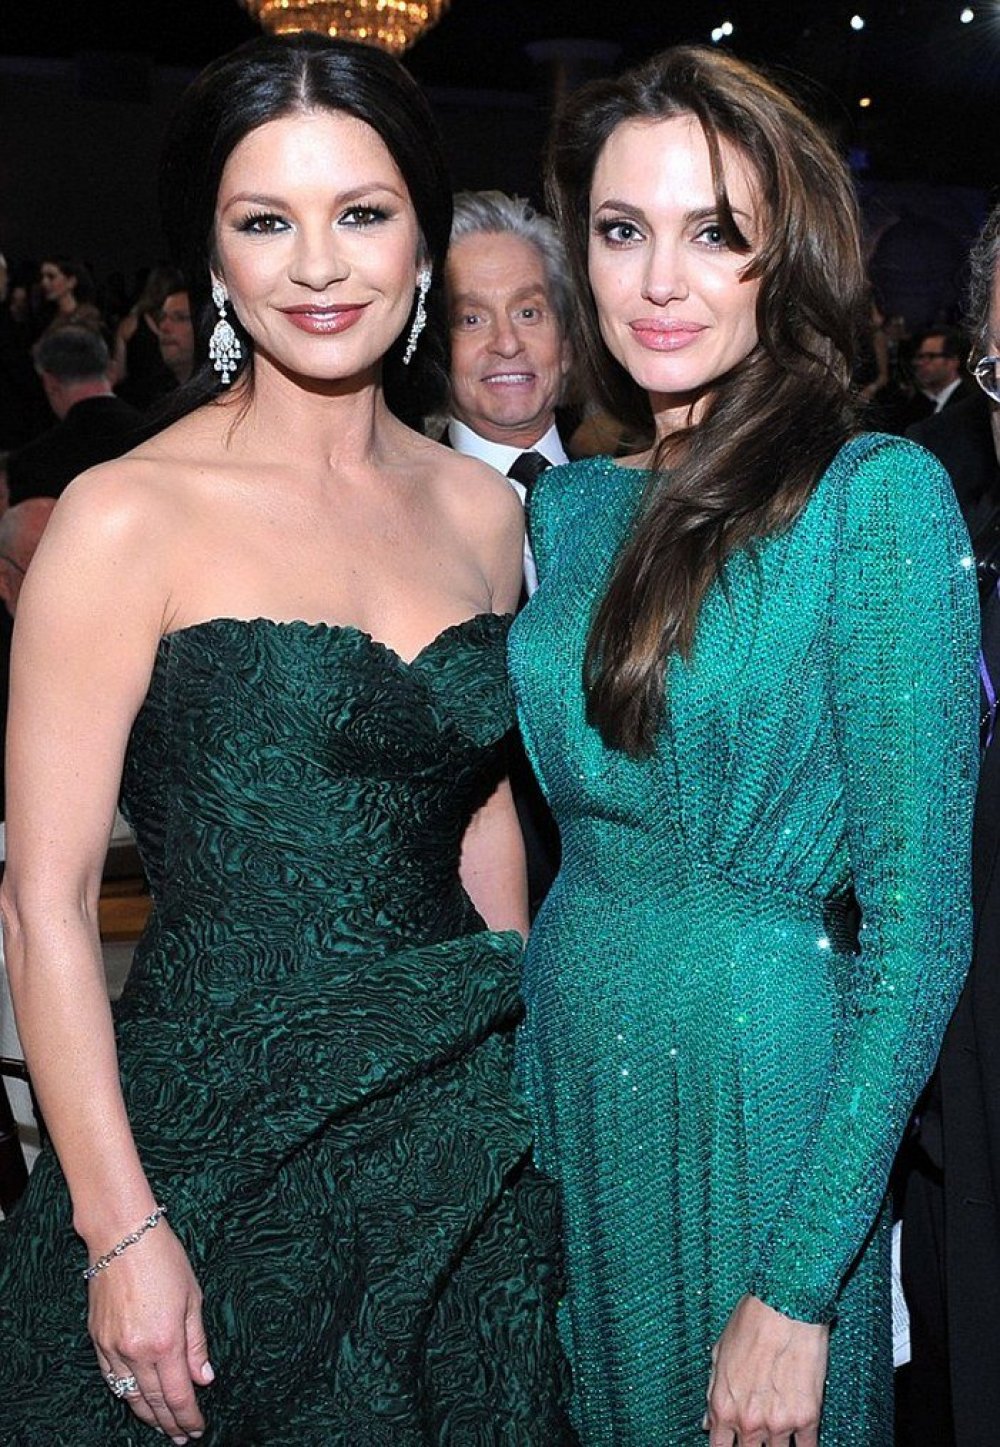 The best photobombs of 2013 from celebrities